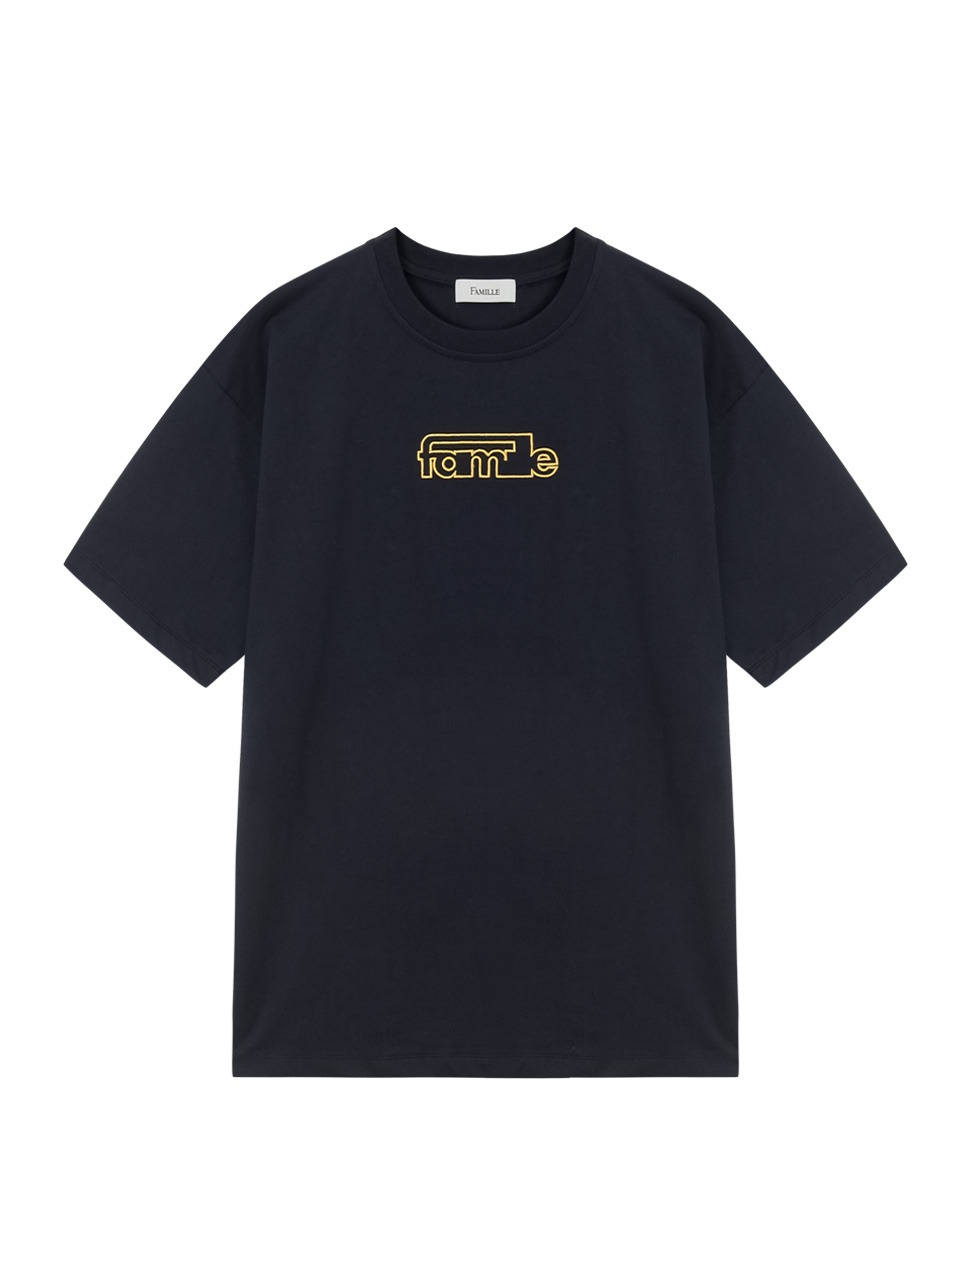 FAMILLE - LINKED EMBROIDERY LOGO T-SHIRT (DARK NAVY)